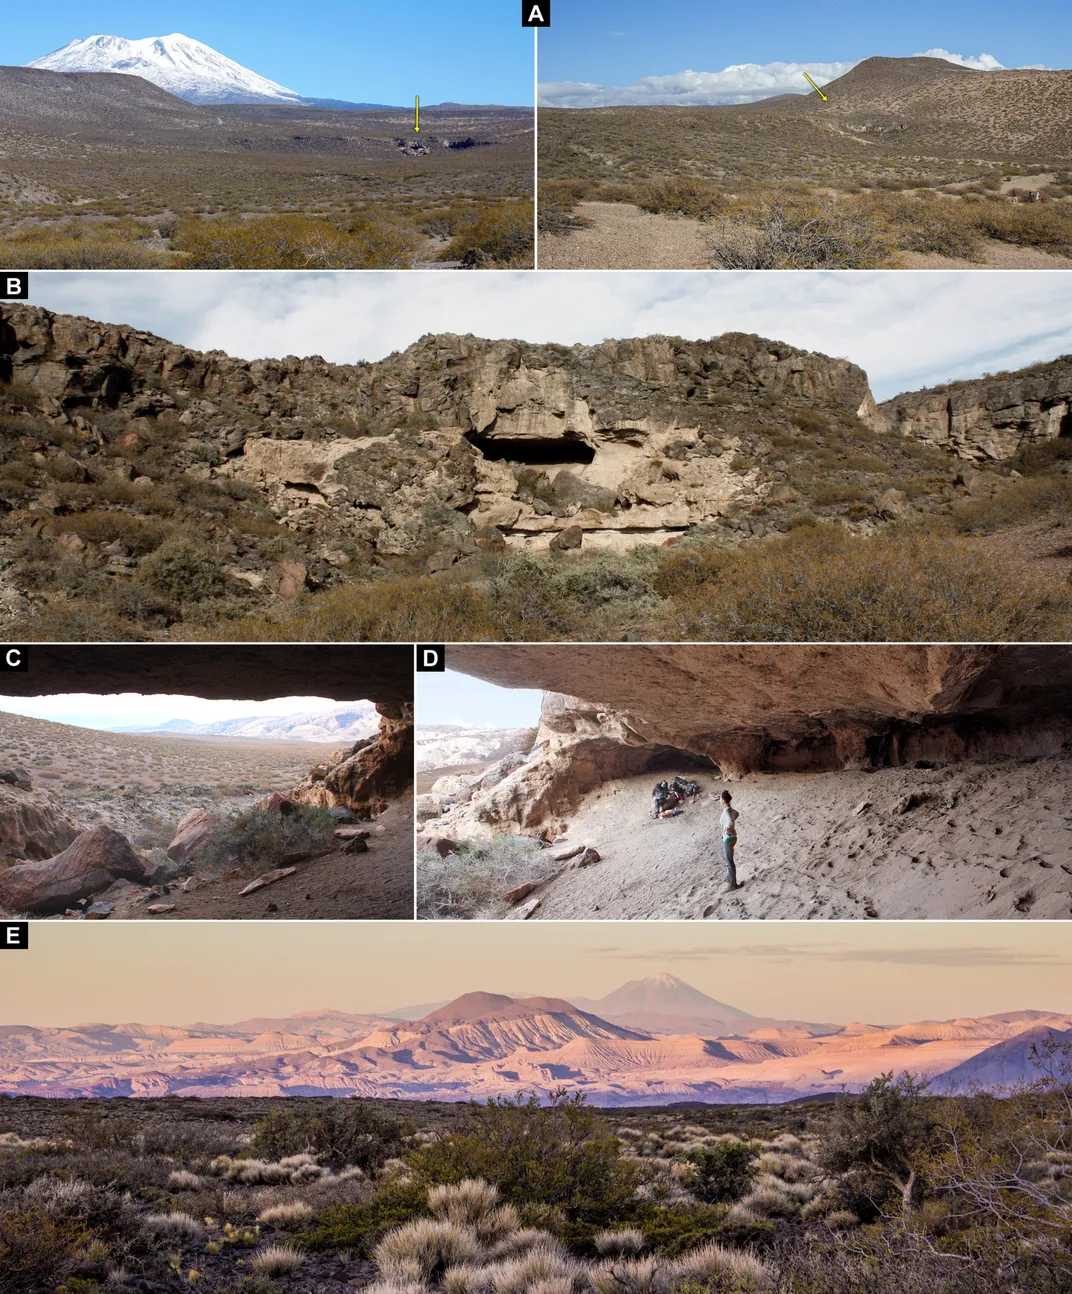 views of and from the cave study site in the Patagonian desert